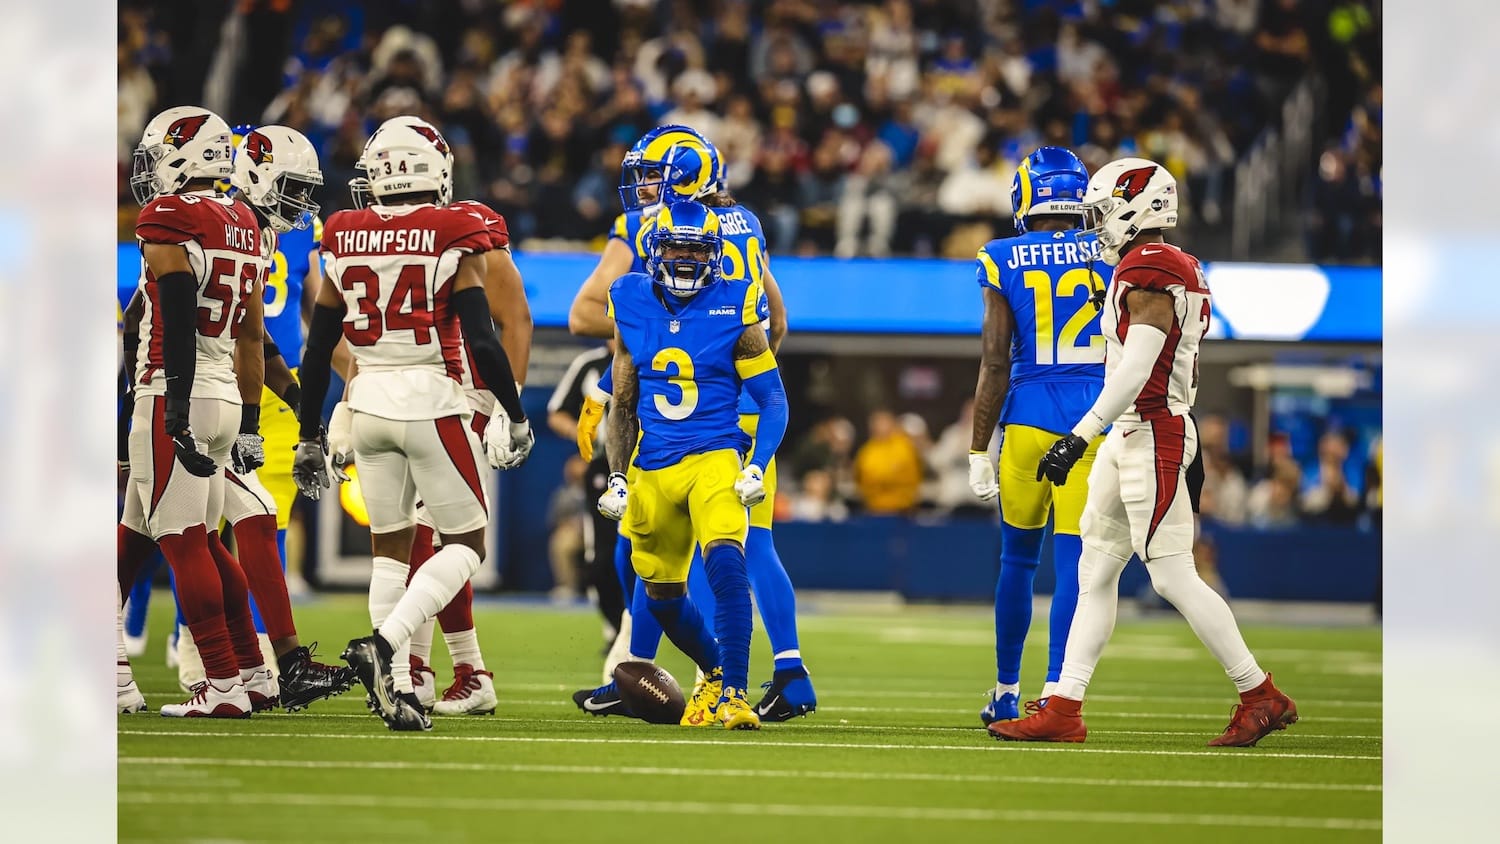 Los Angeles Rams Wide Receiver Odell Beckham Jr. During The Wild Card Playoff Game Against The Arizona Cardinals. Photo CreditL Brevin Townsell | LA Rams